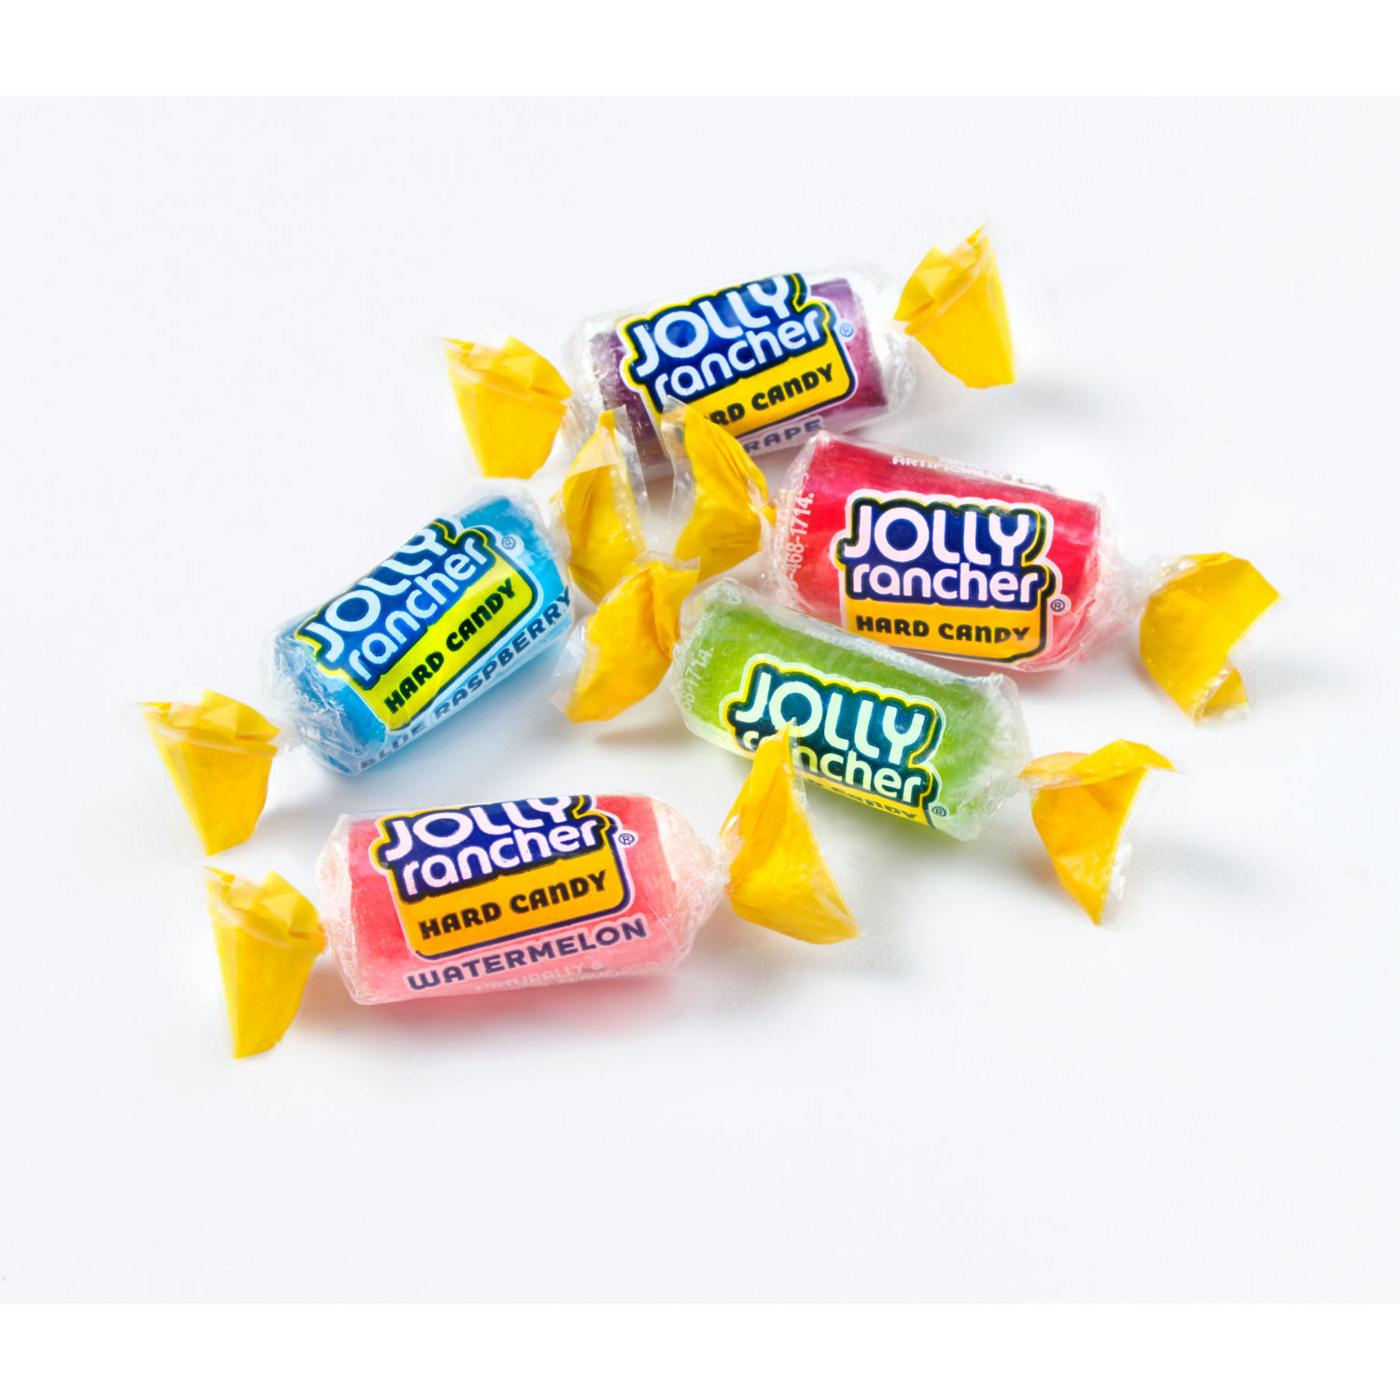 Jolly Rancher Original Fruit Flavored Hard Candy; image 4 of 4